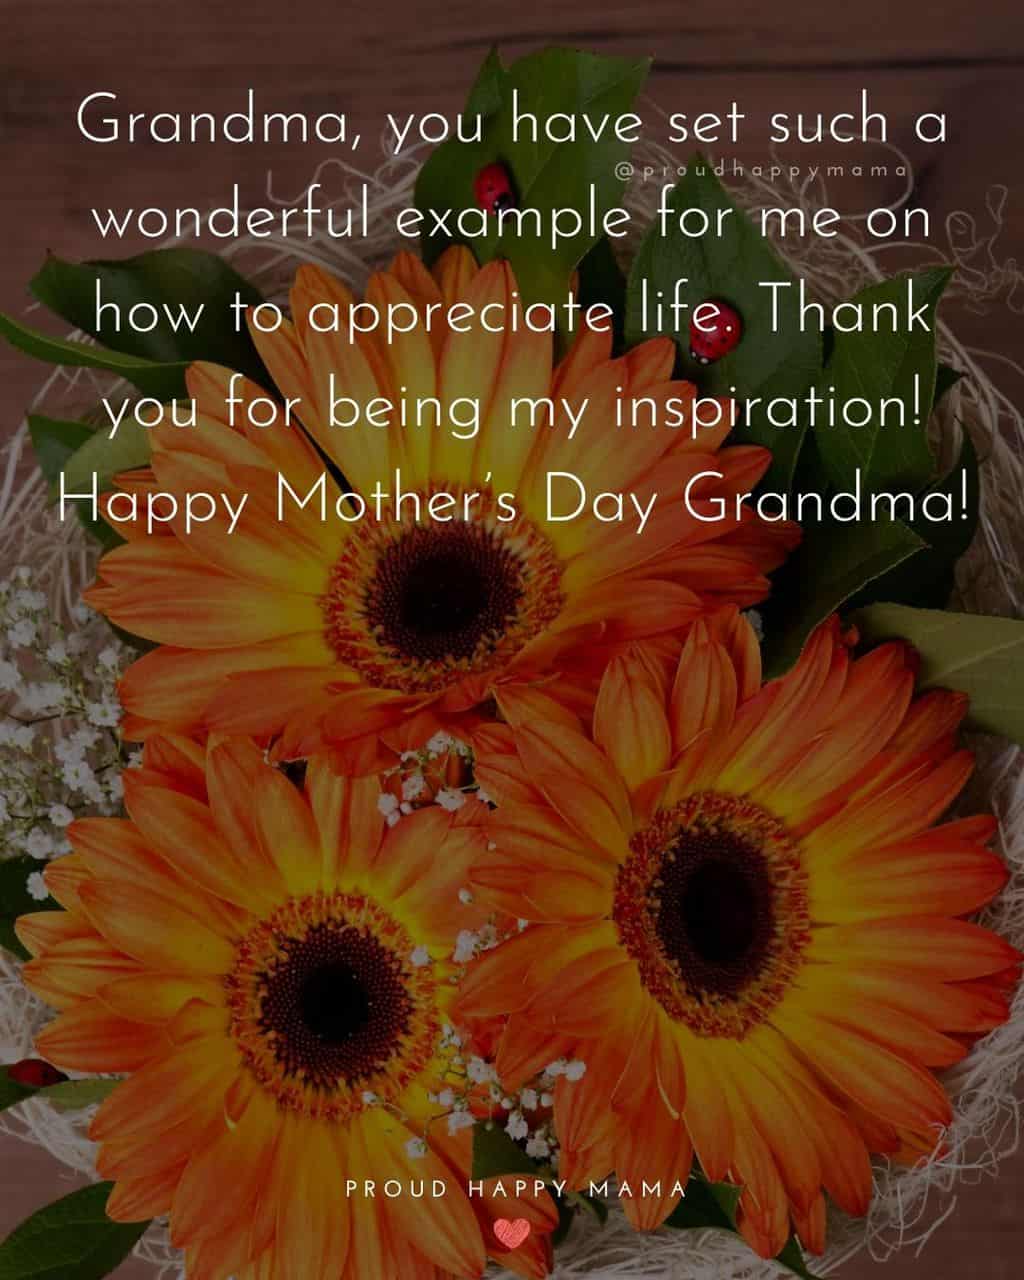 Happy Mothers Day Quotes To Grandma - Grandma, you have set such a wonderful example for me on how to appreciate life.